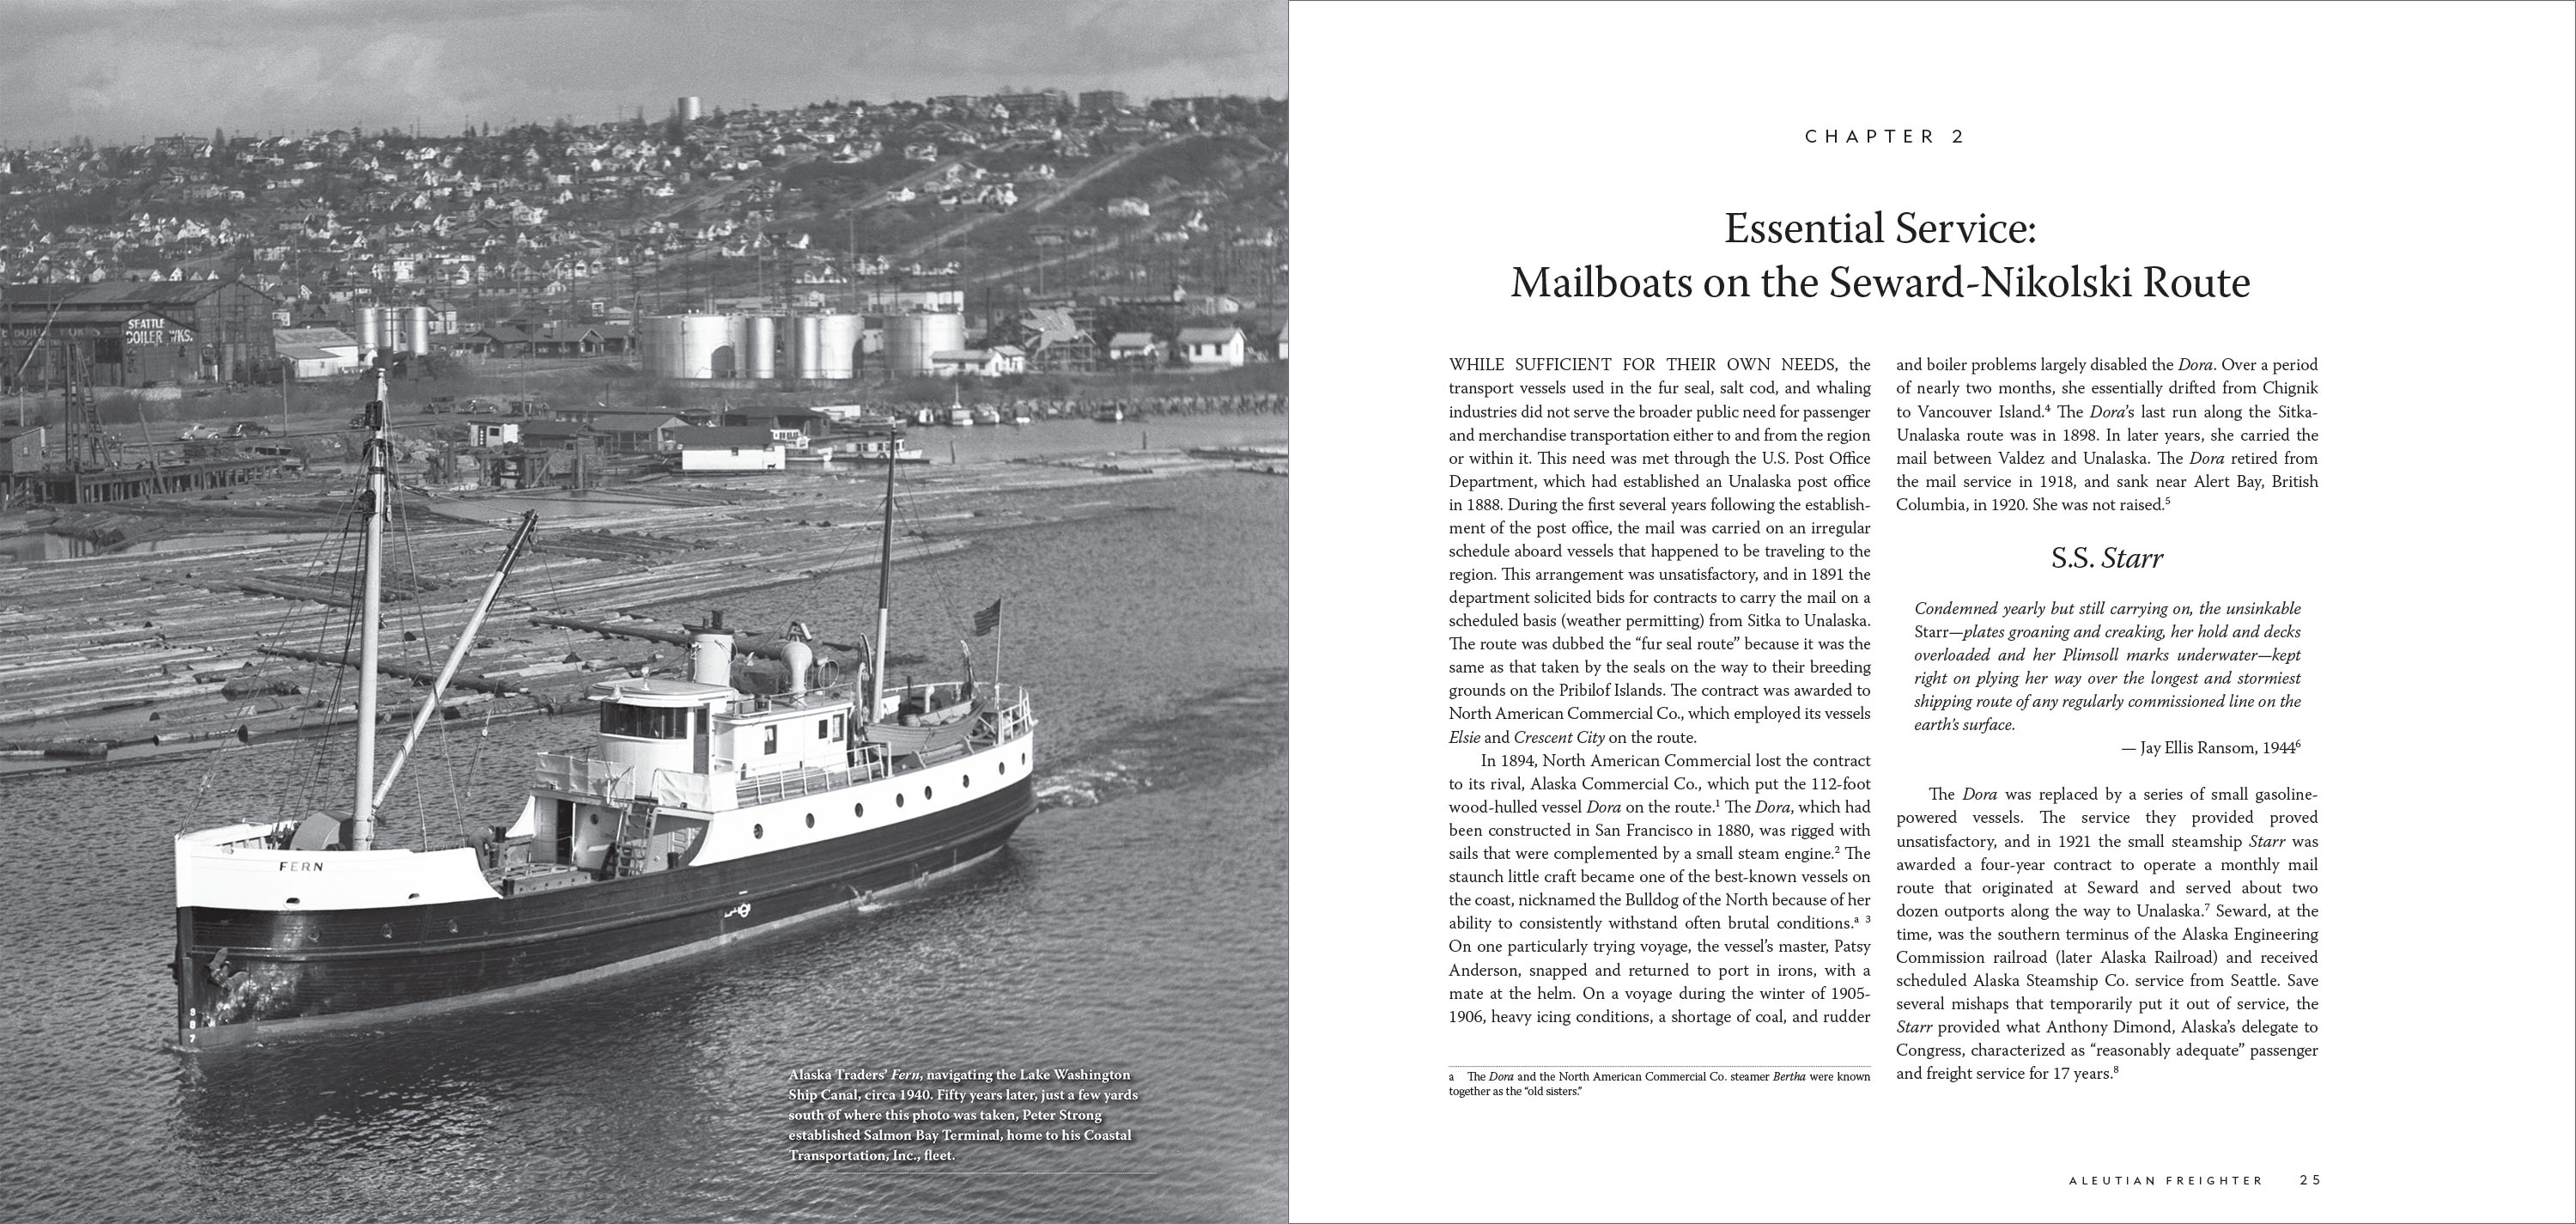 inside the corporate history book Aleutian Freighter